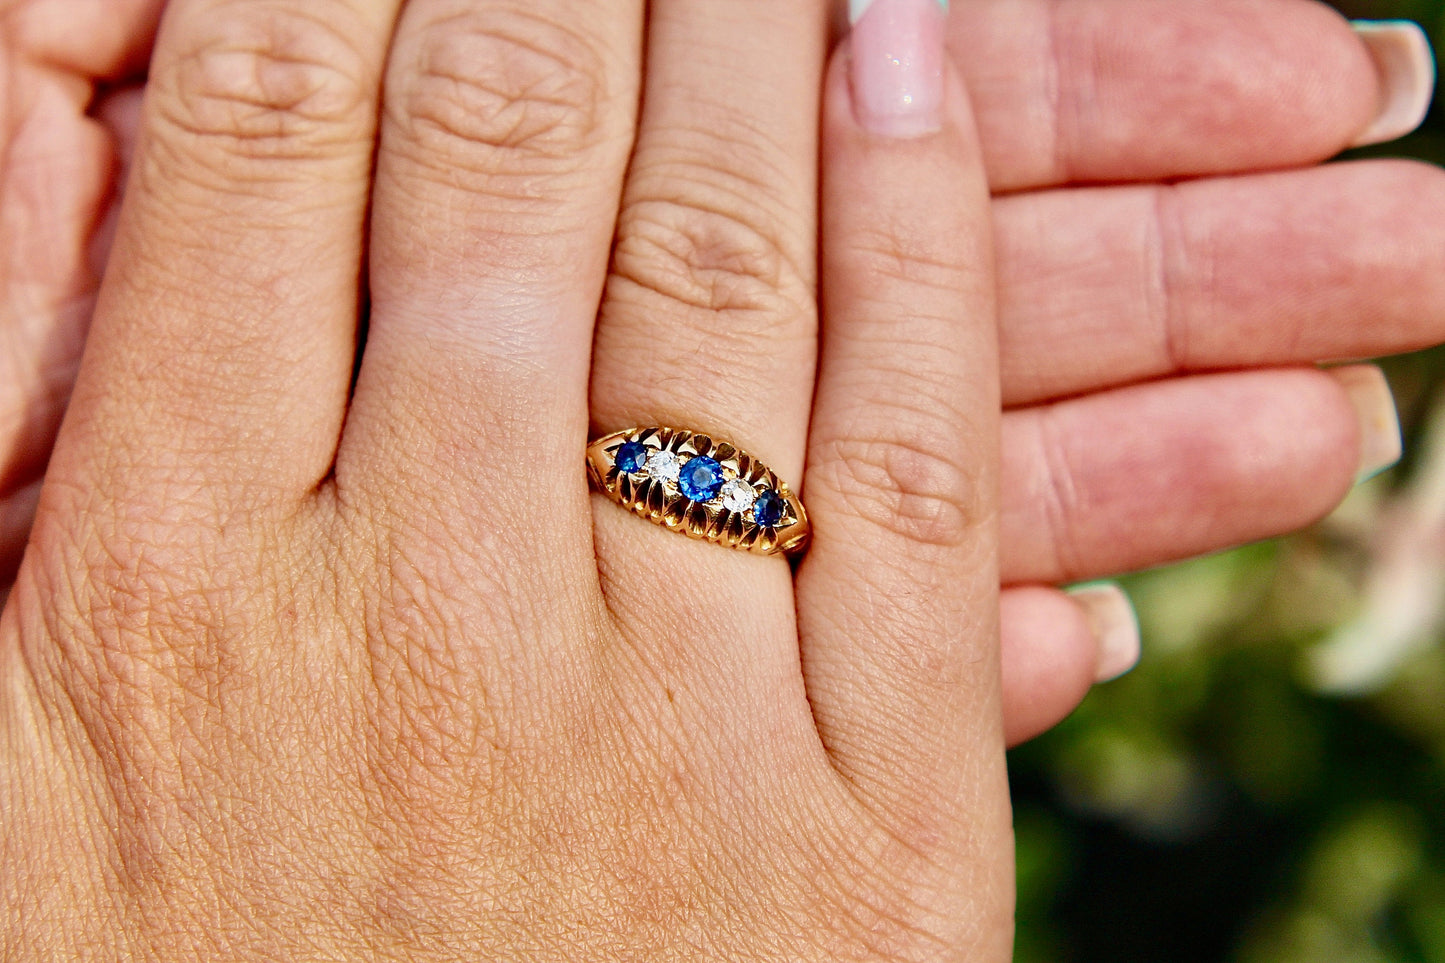 Antique Edwardian Diamond and Sapphire 18ct Gold Ring - 1903